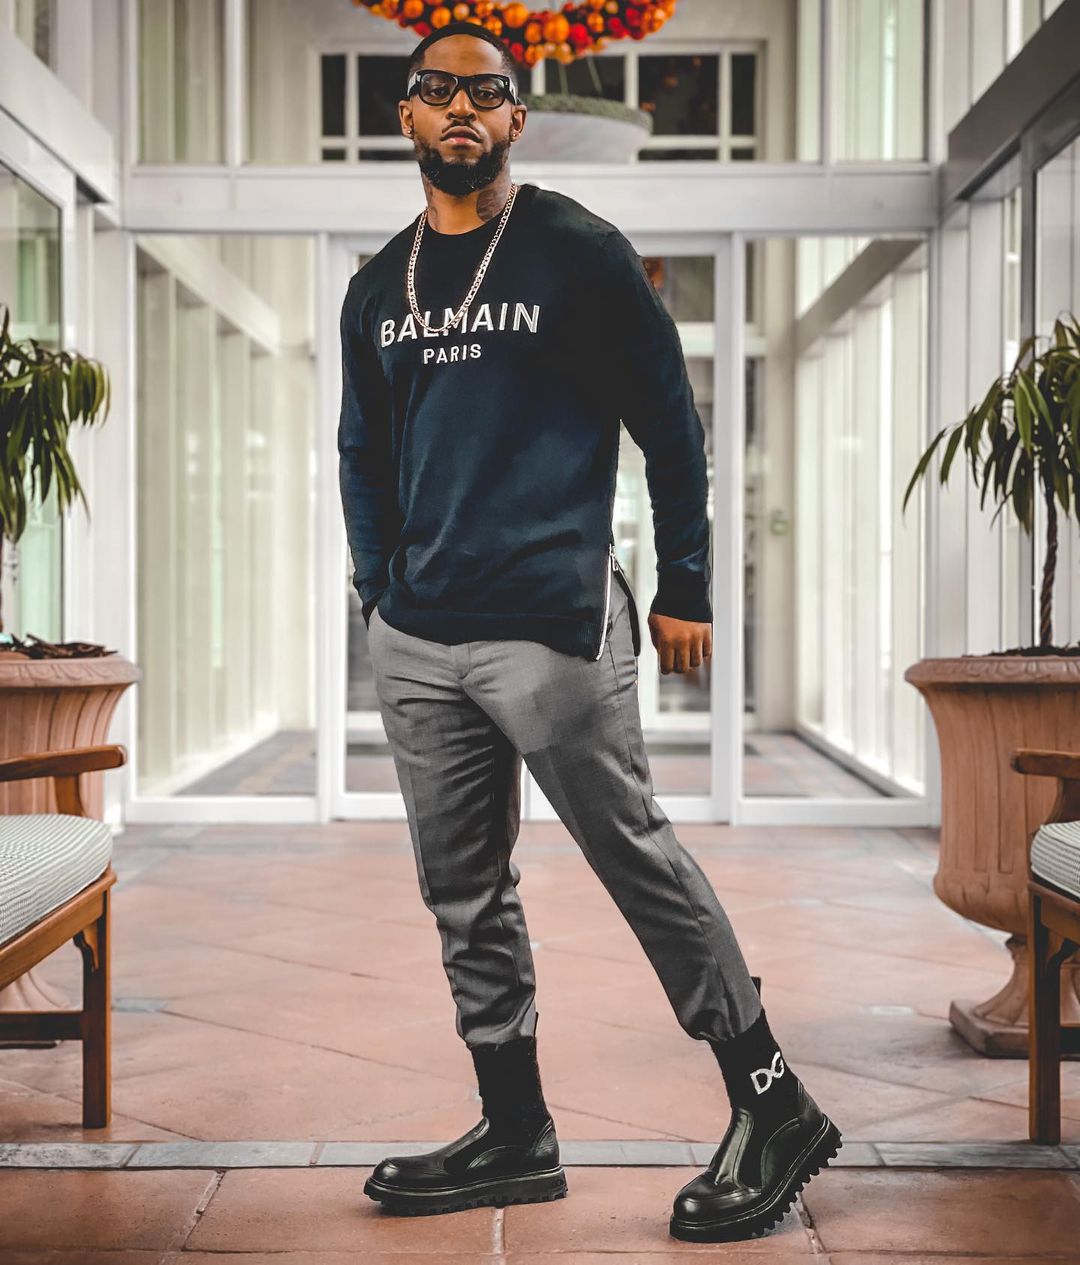 Prince Kaybee (Source Instagram)